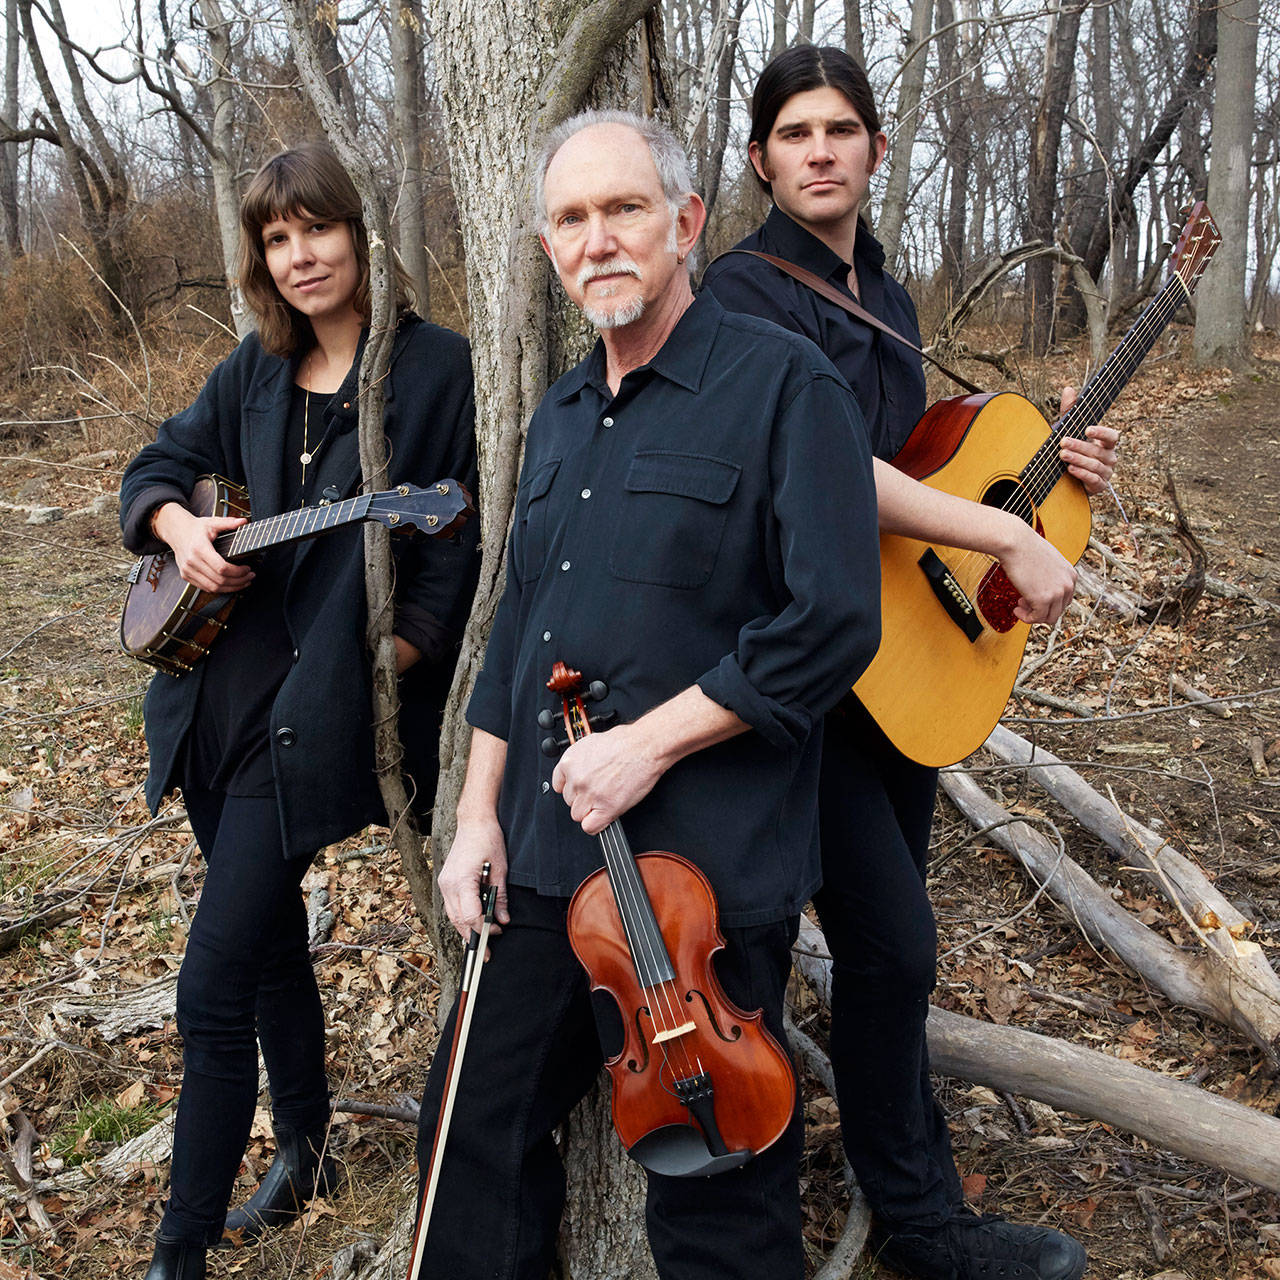 Bruce Molsky and Molsky’s Mountain Drifters will come to Port Townsend’s Quimper Grange, 1219 Corona St., for a workshop and concert Monday. The workshop will start at 3:30 p.m., and the concert will begin at 7 p.m. (Bruce Molsky)